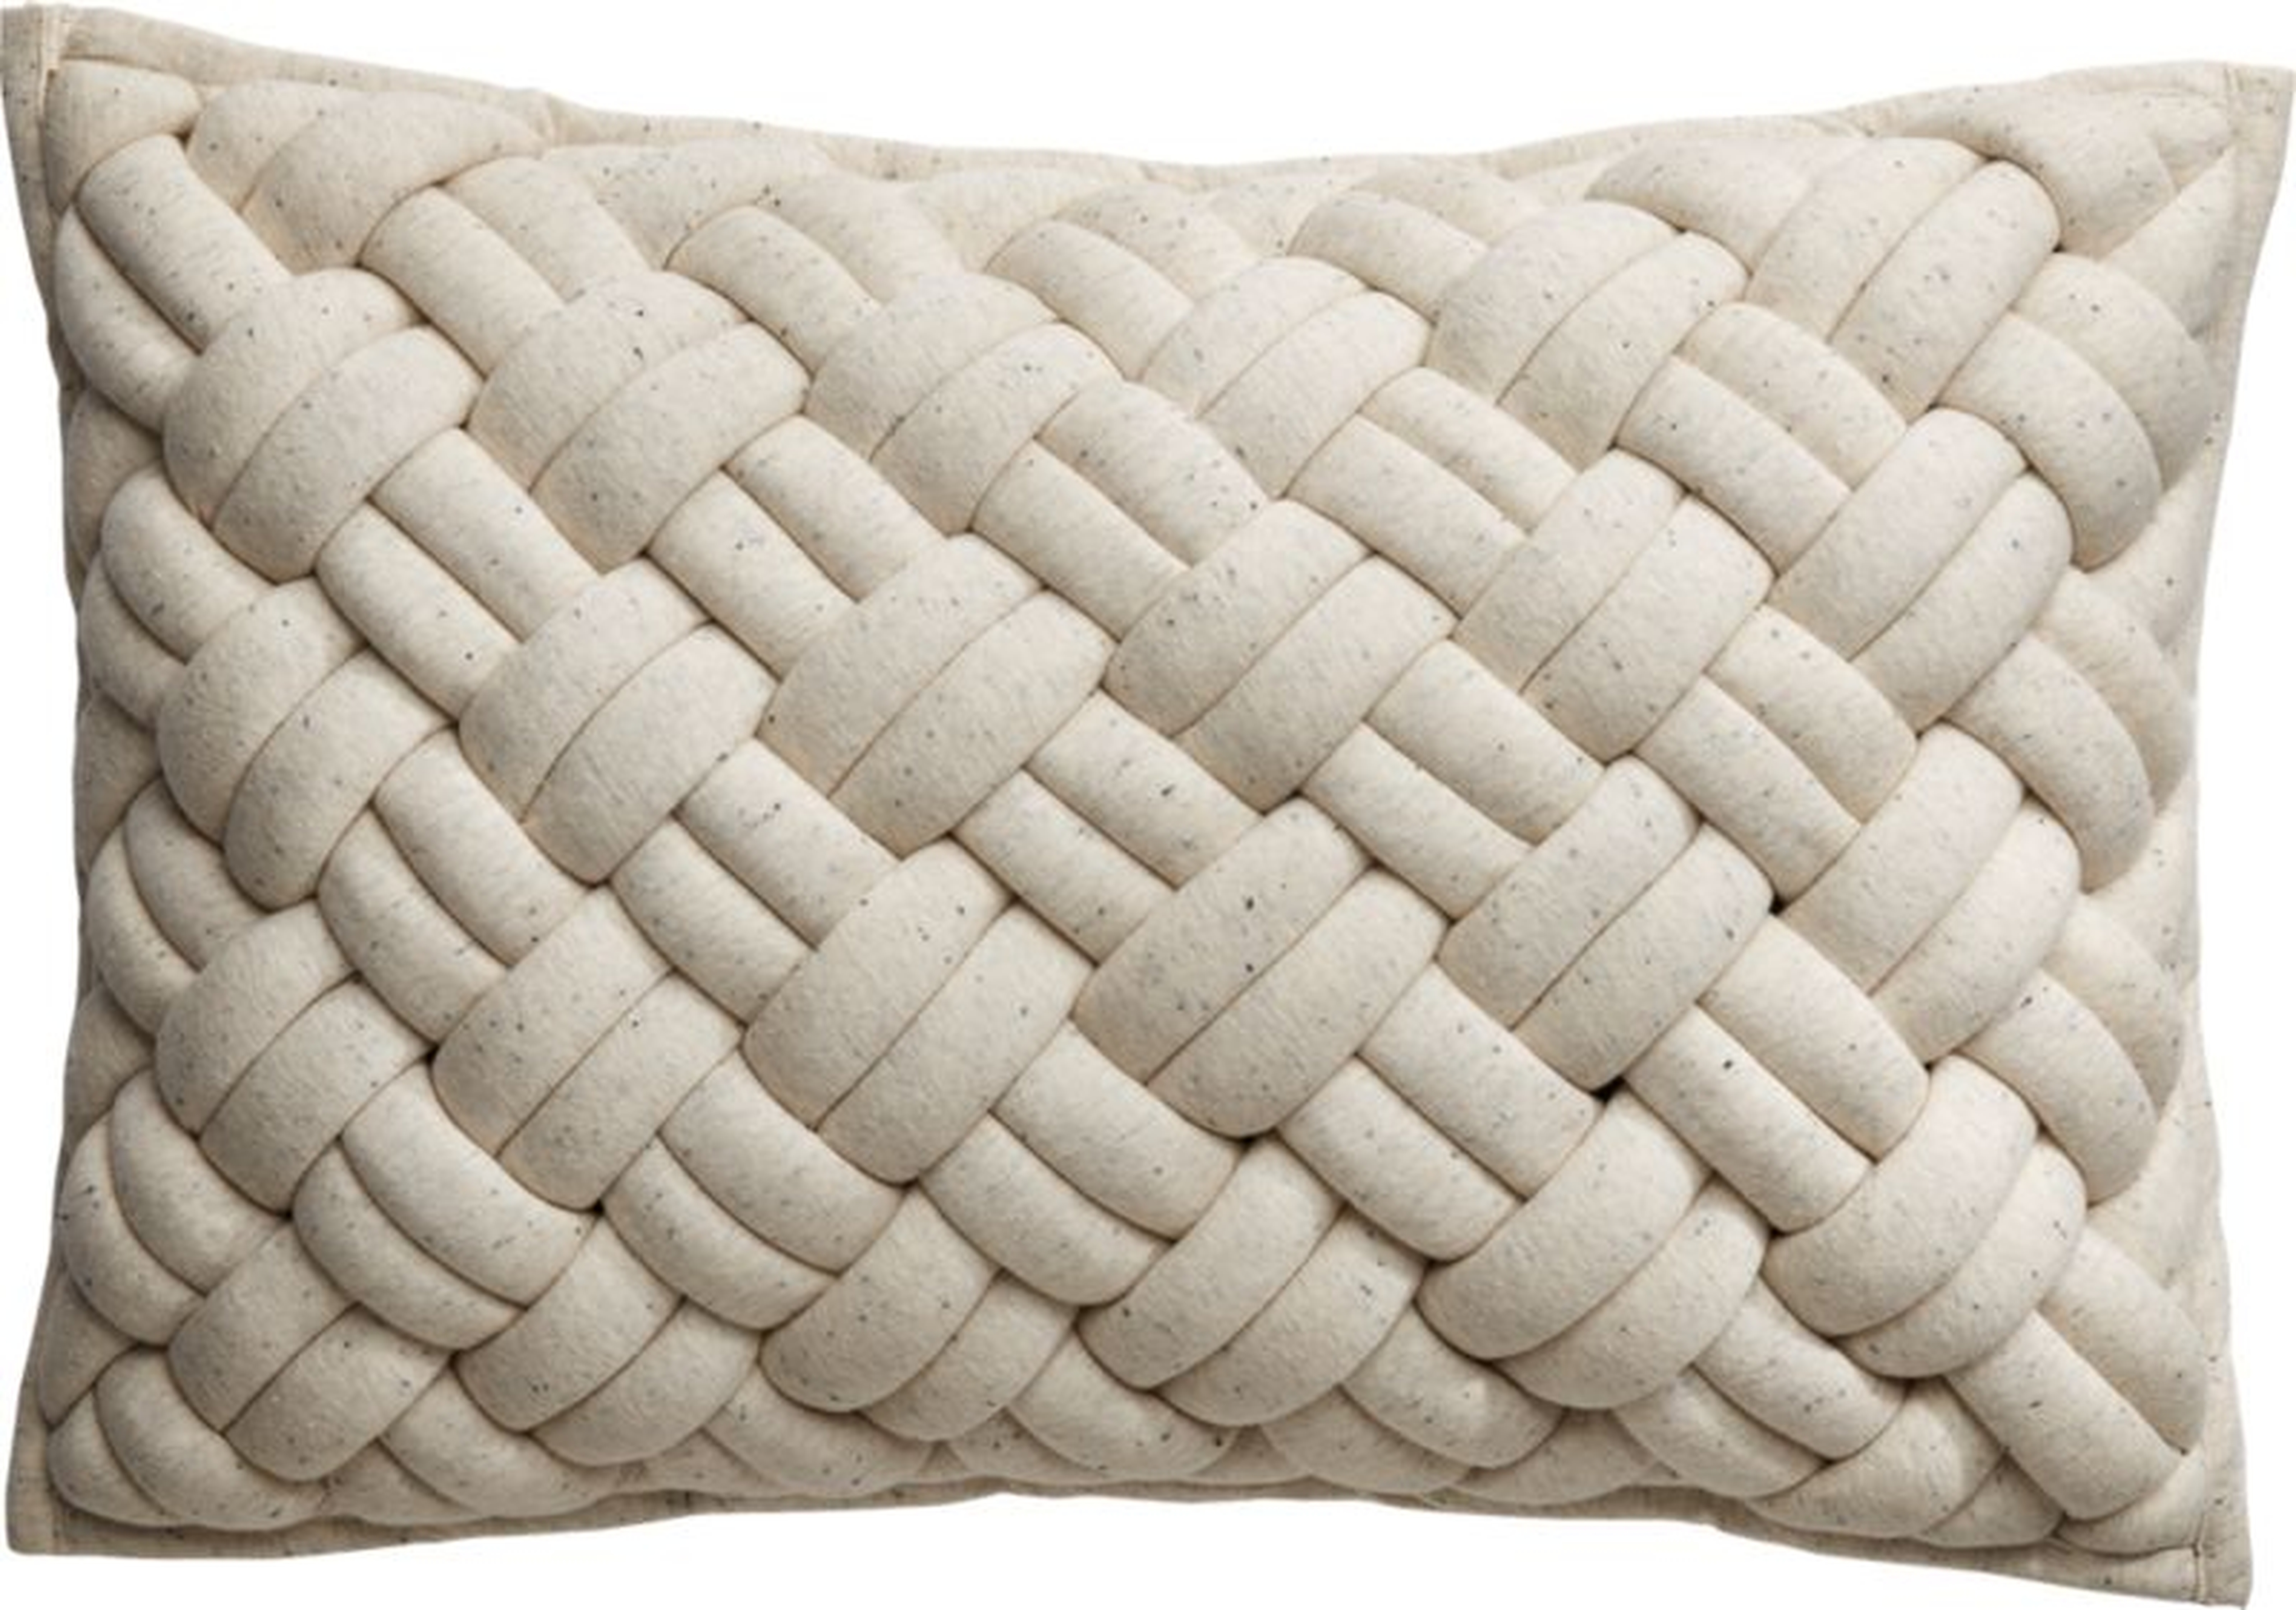 18"x12" Jersey Ivory InterKnit Pillow with Feather-Down Insert - CB2